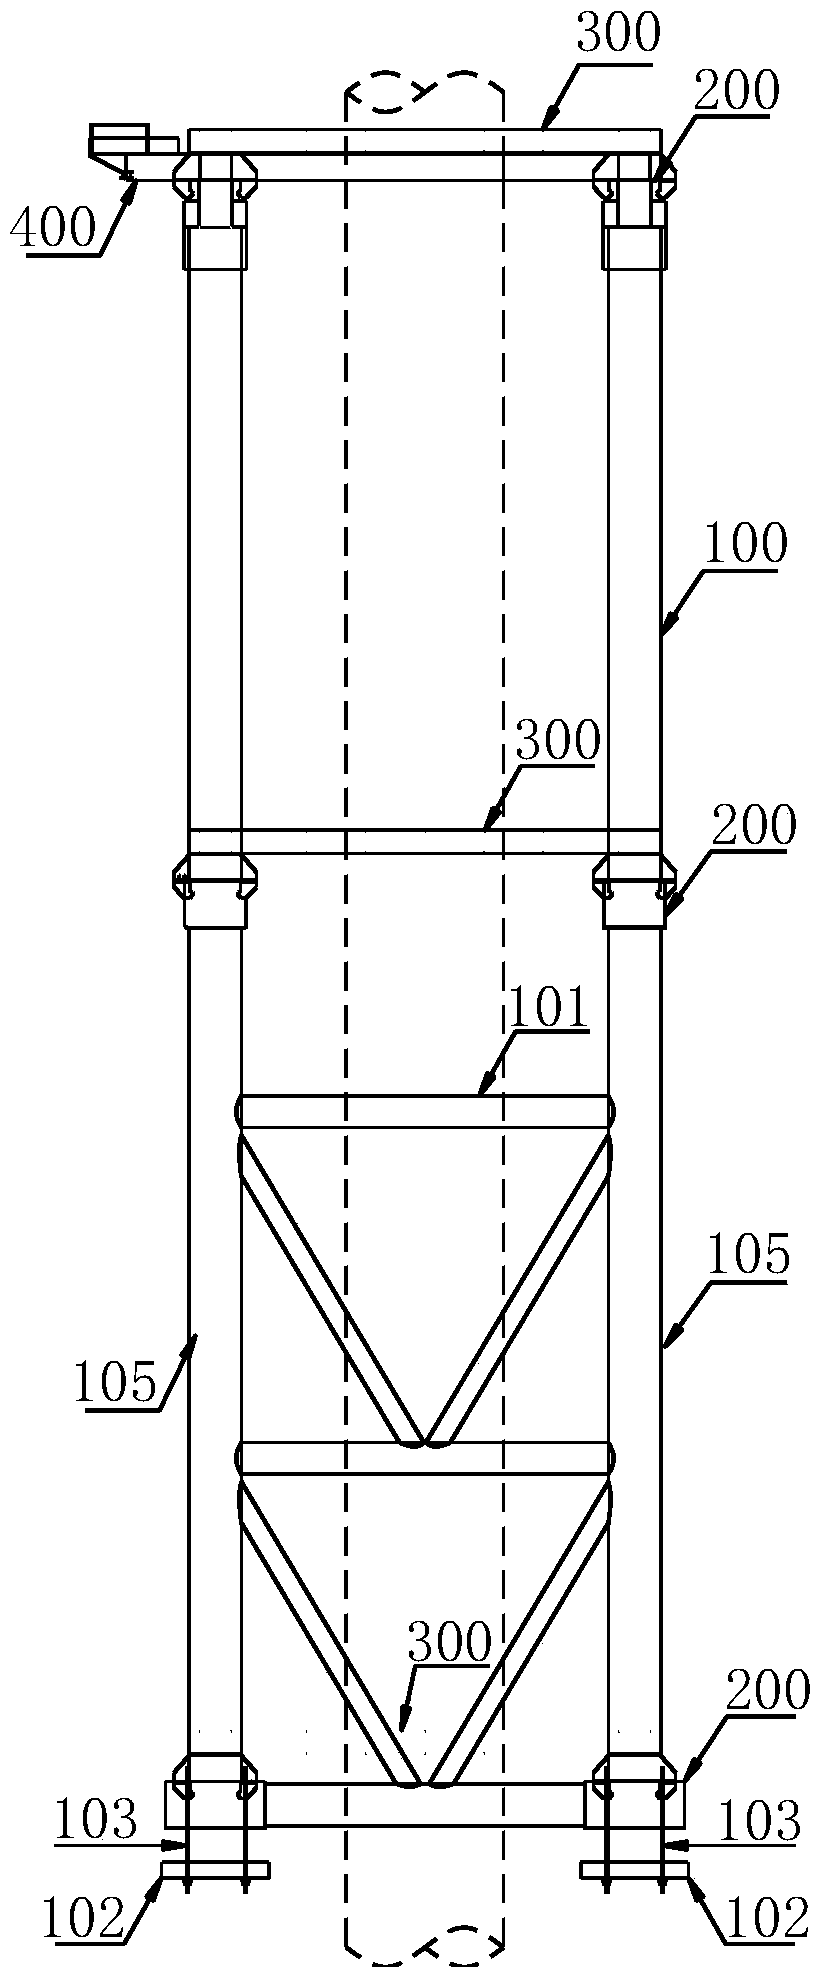 A multi-level guide bracket for oblique insertion and driving of ultra-long diameter piles